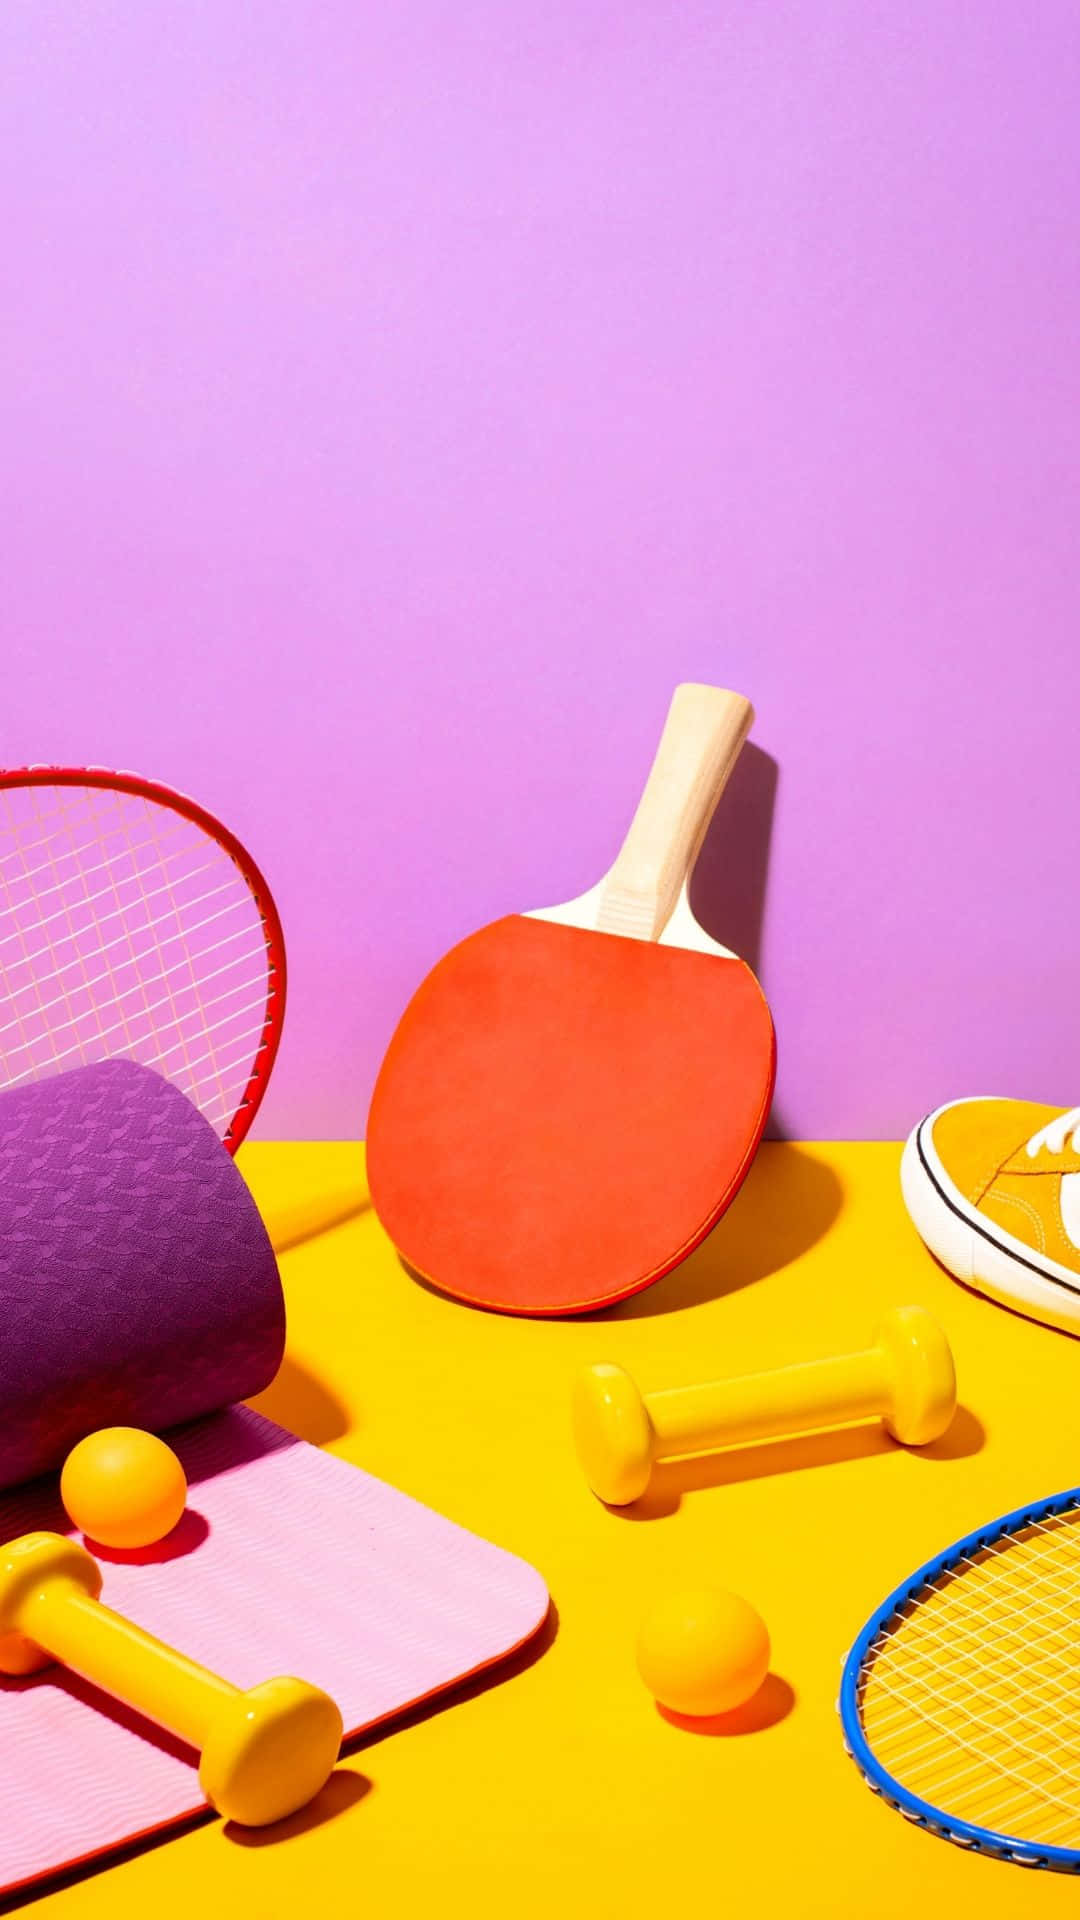 Badminton And Table Tennis Sports Equipment Background